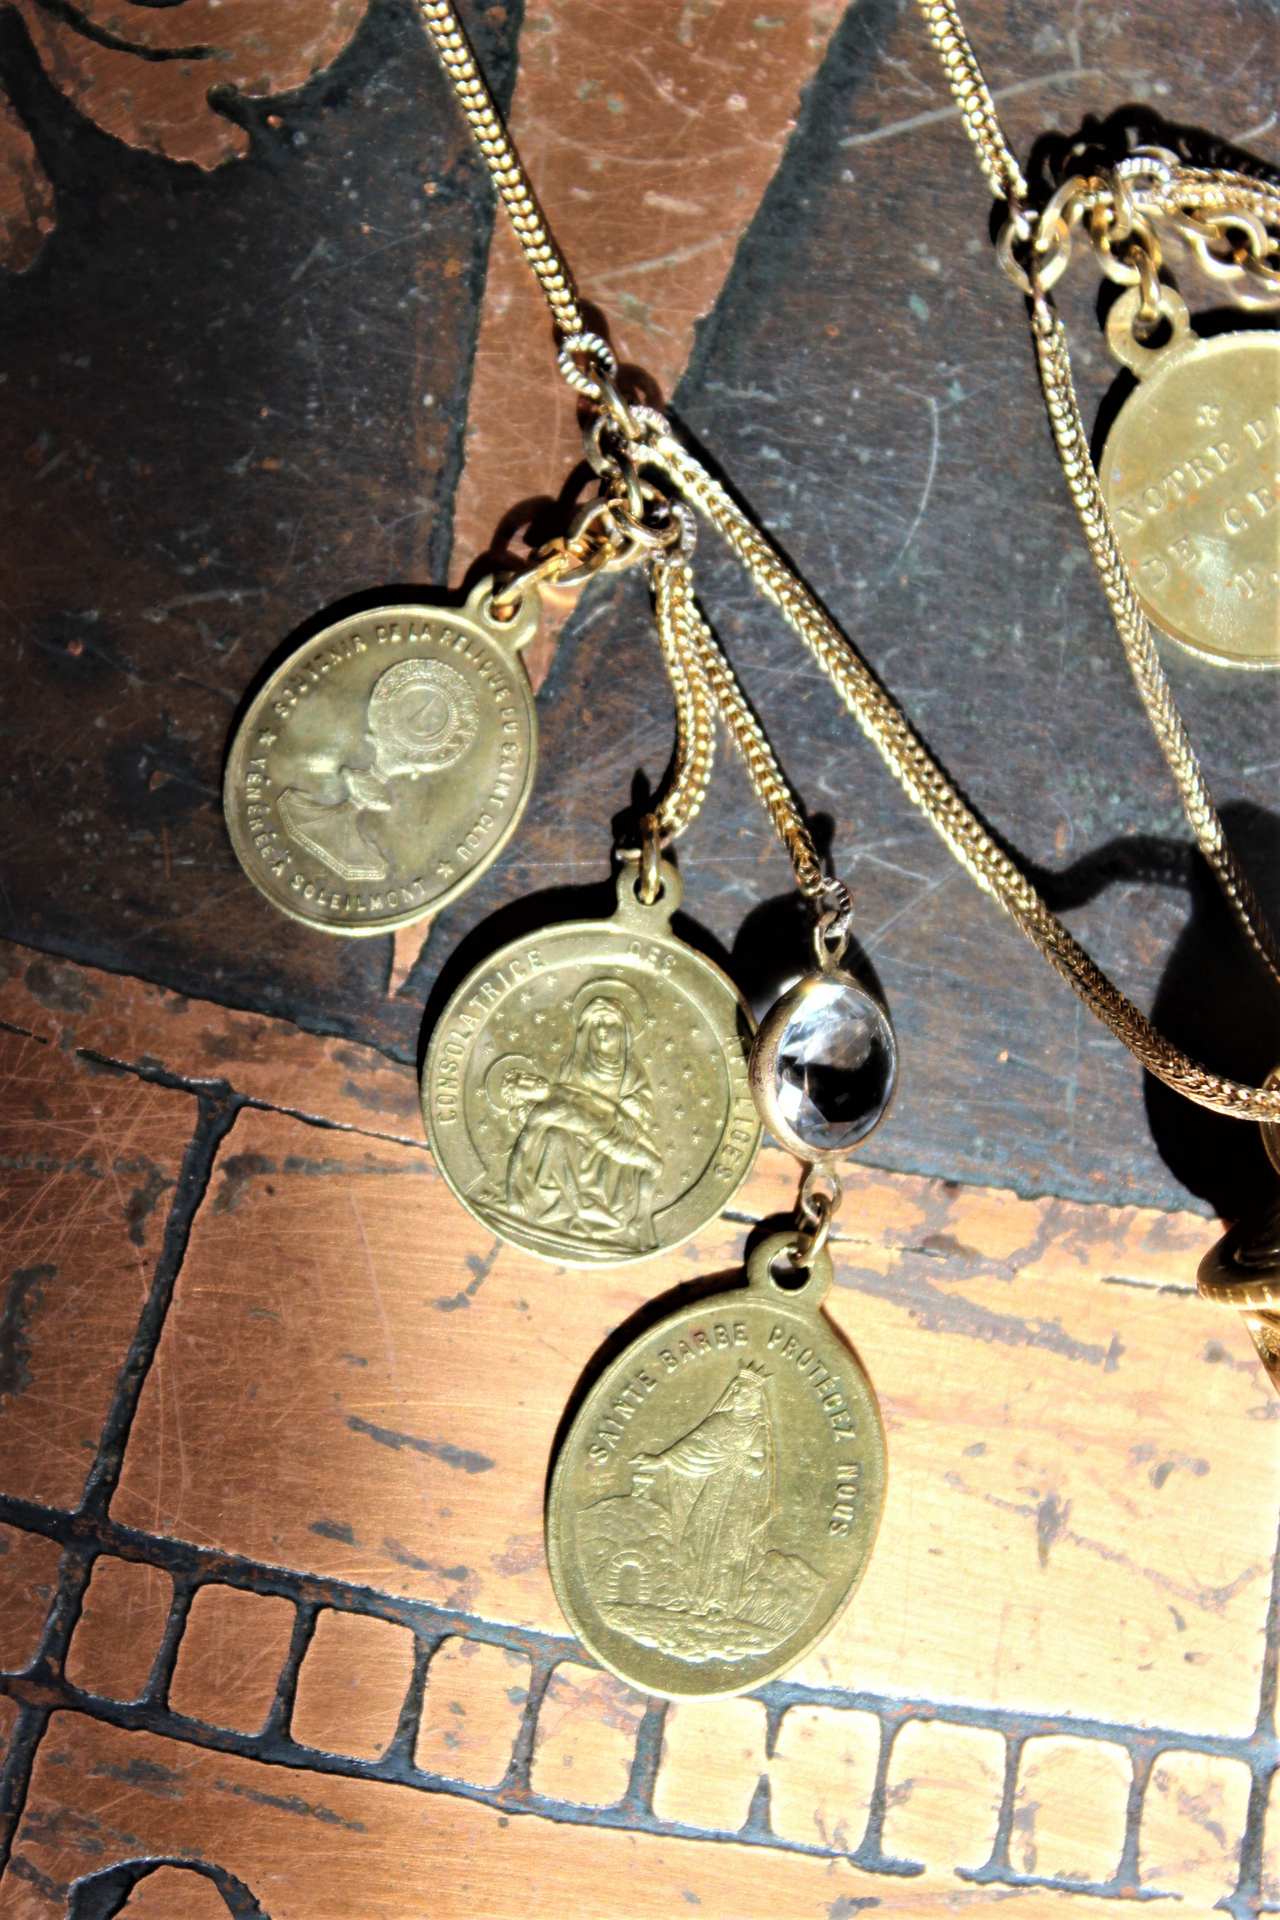 You will Find your Way Necklace with Capped Water Clear Rock Quartz Point, Antique French Medals, Antique French Crucifix and Foxtail Chain